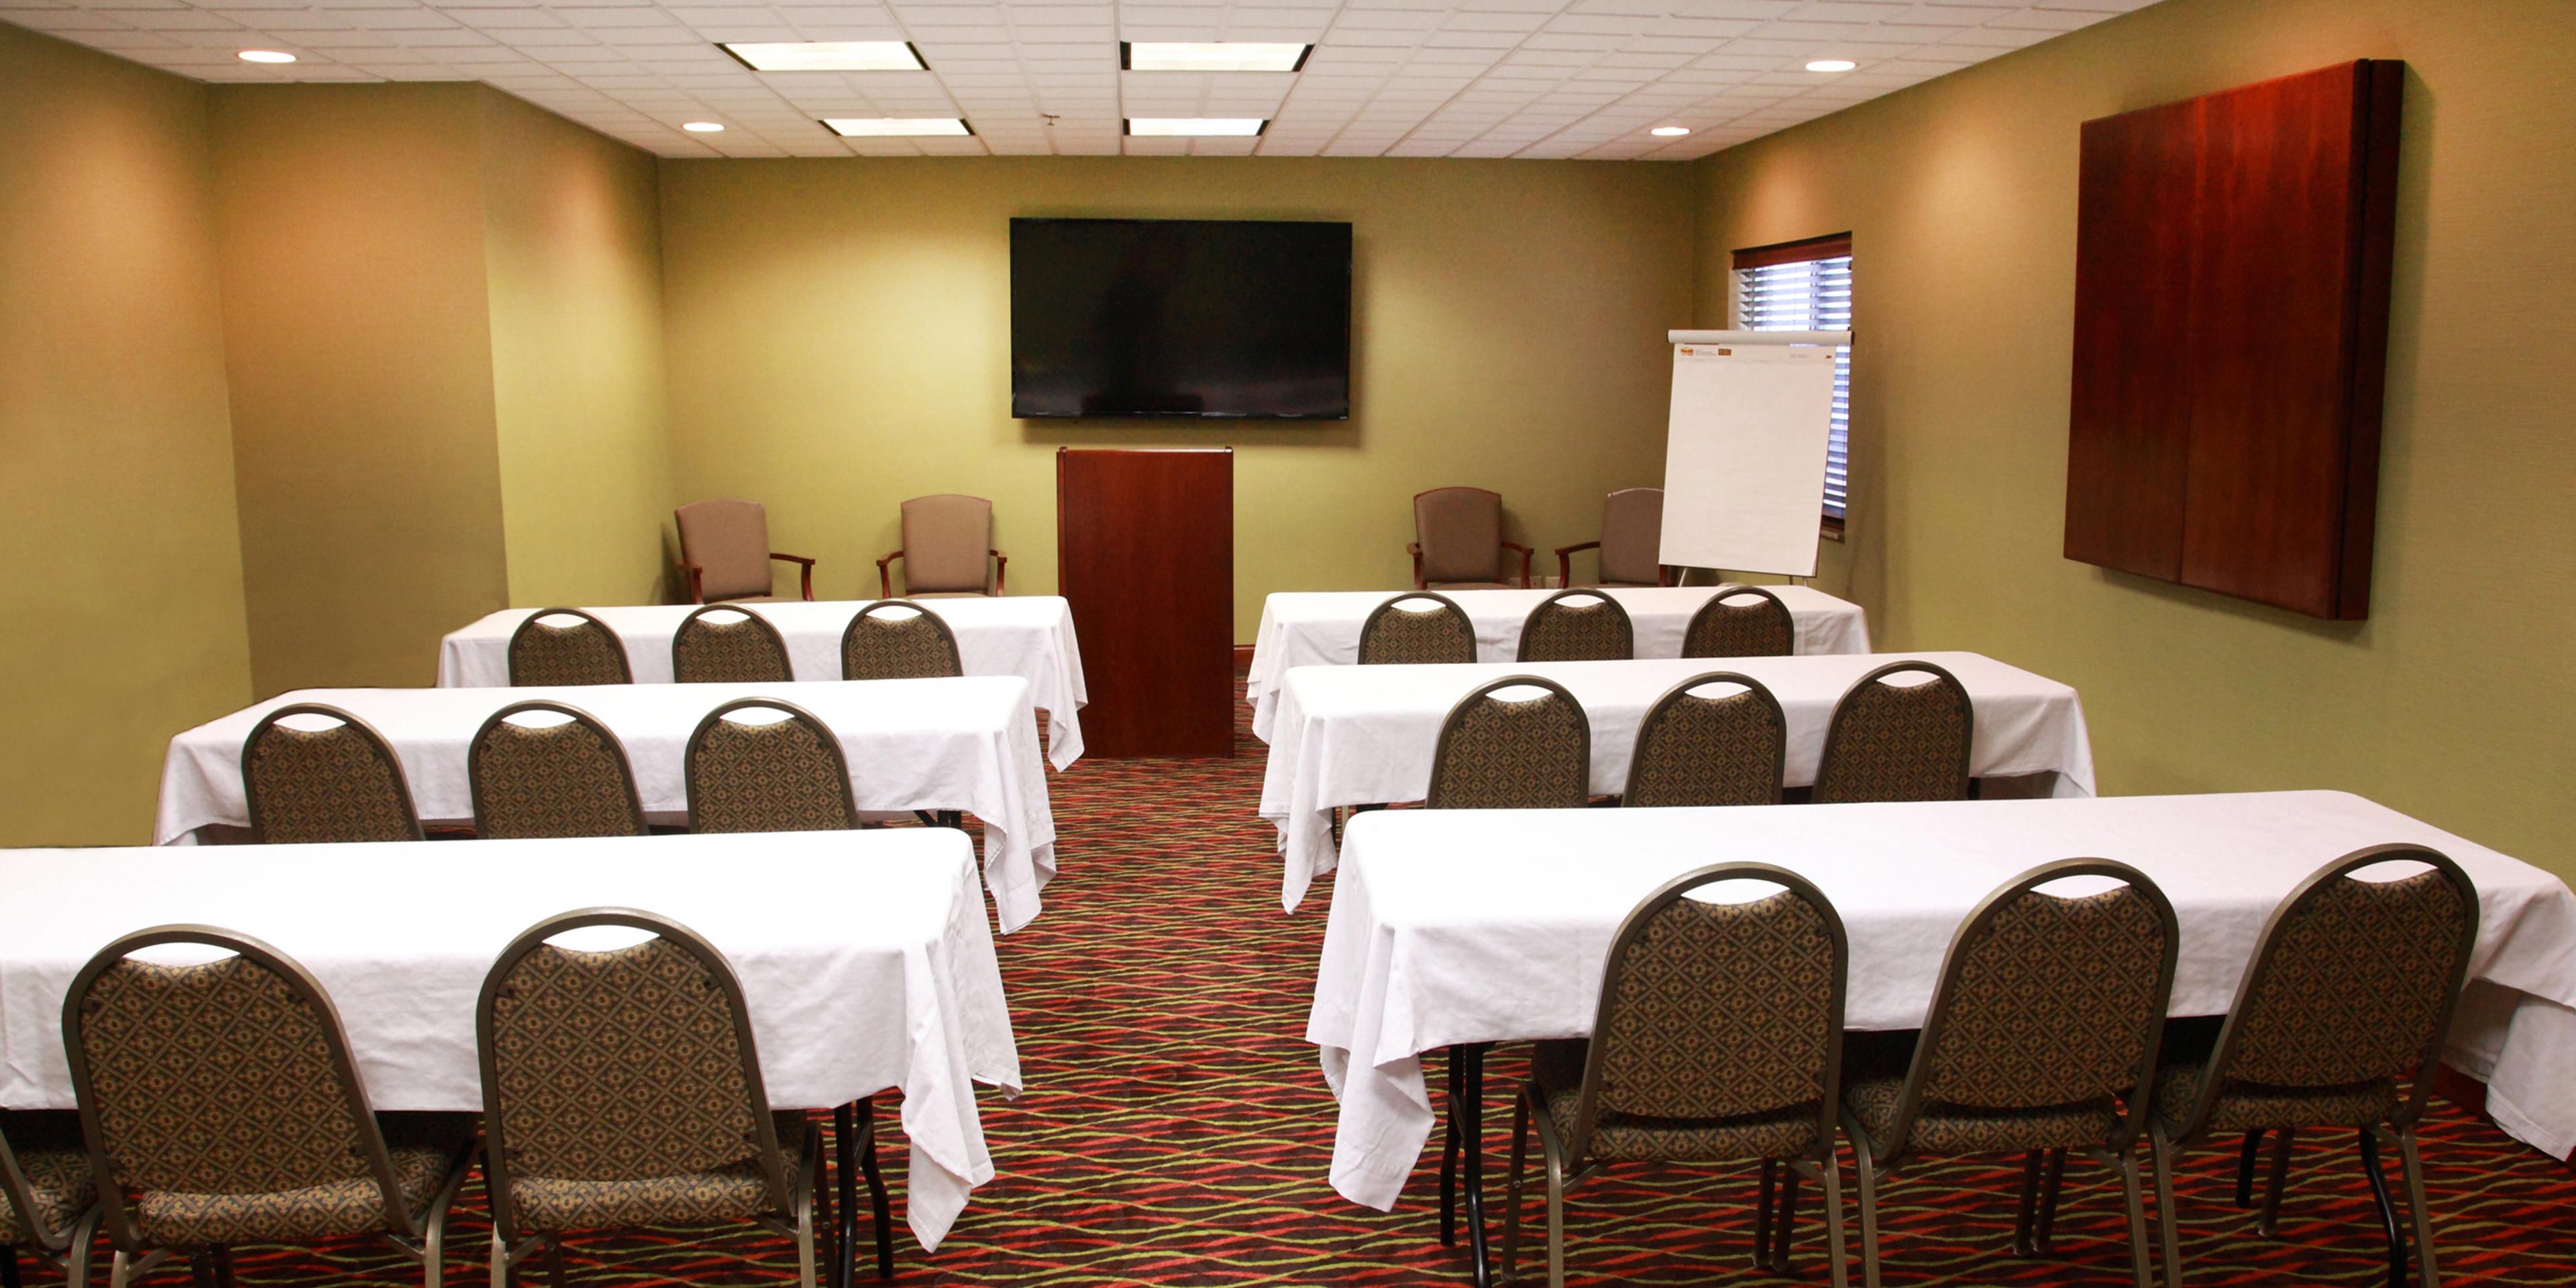 You're welcome to use our 558-sq-ft meeting room for the business or social event you're planning in Jamestown. Our hotel meeting room can accommodate 35 of your guests, and boasts free high-speed, Wi-Fi Internet access and windows for natural lighting.